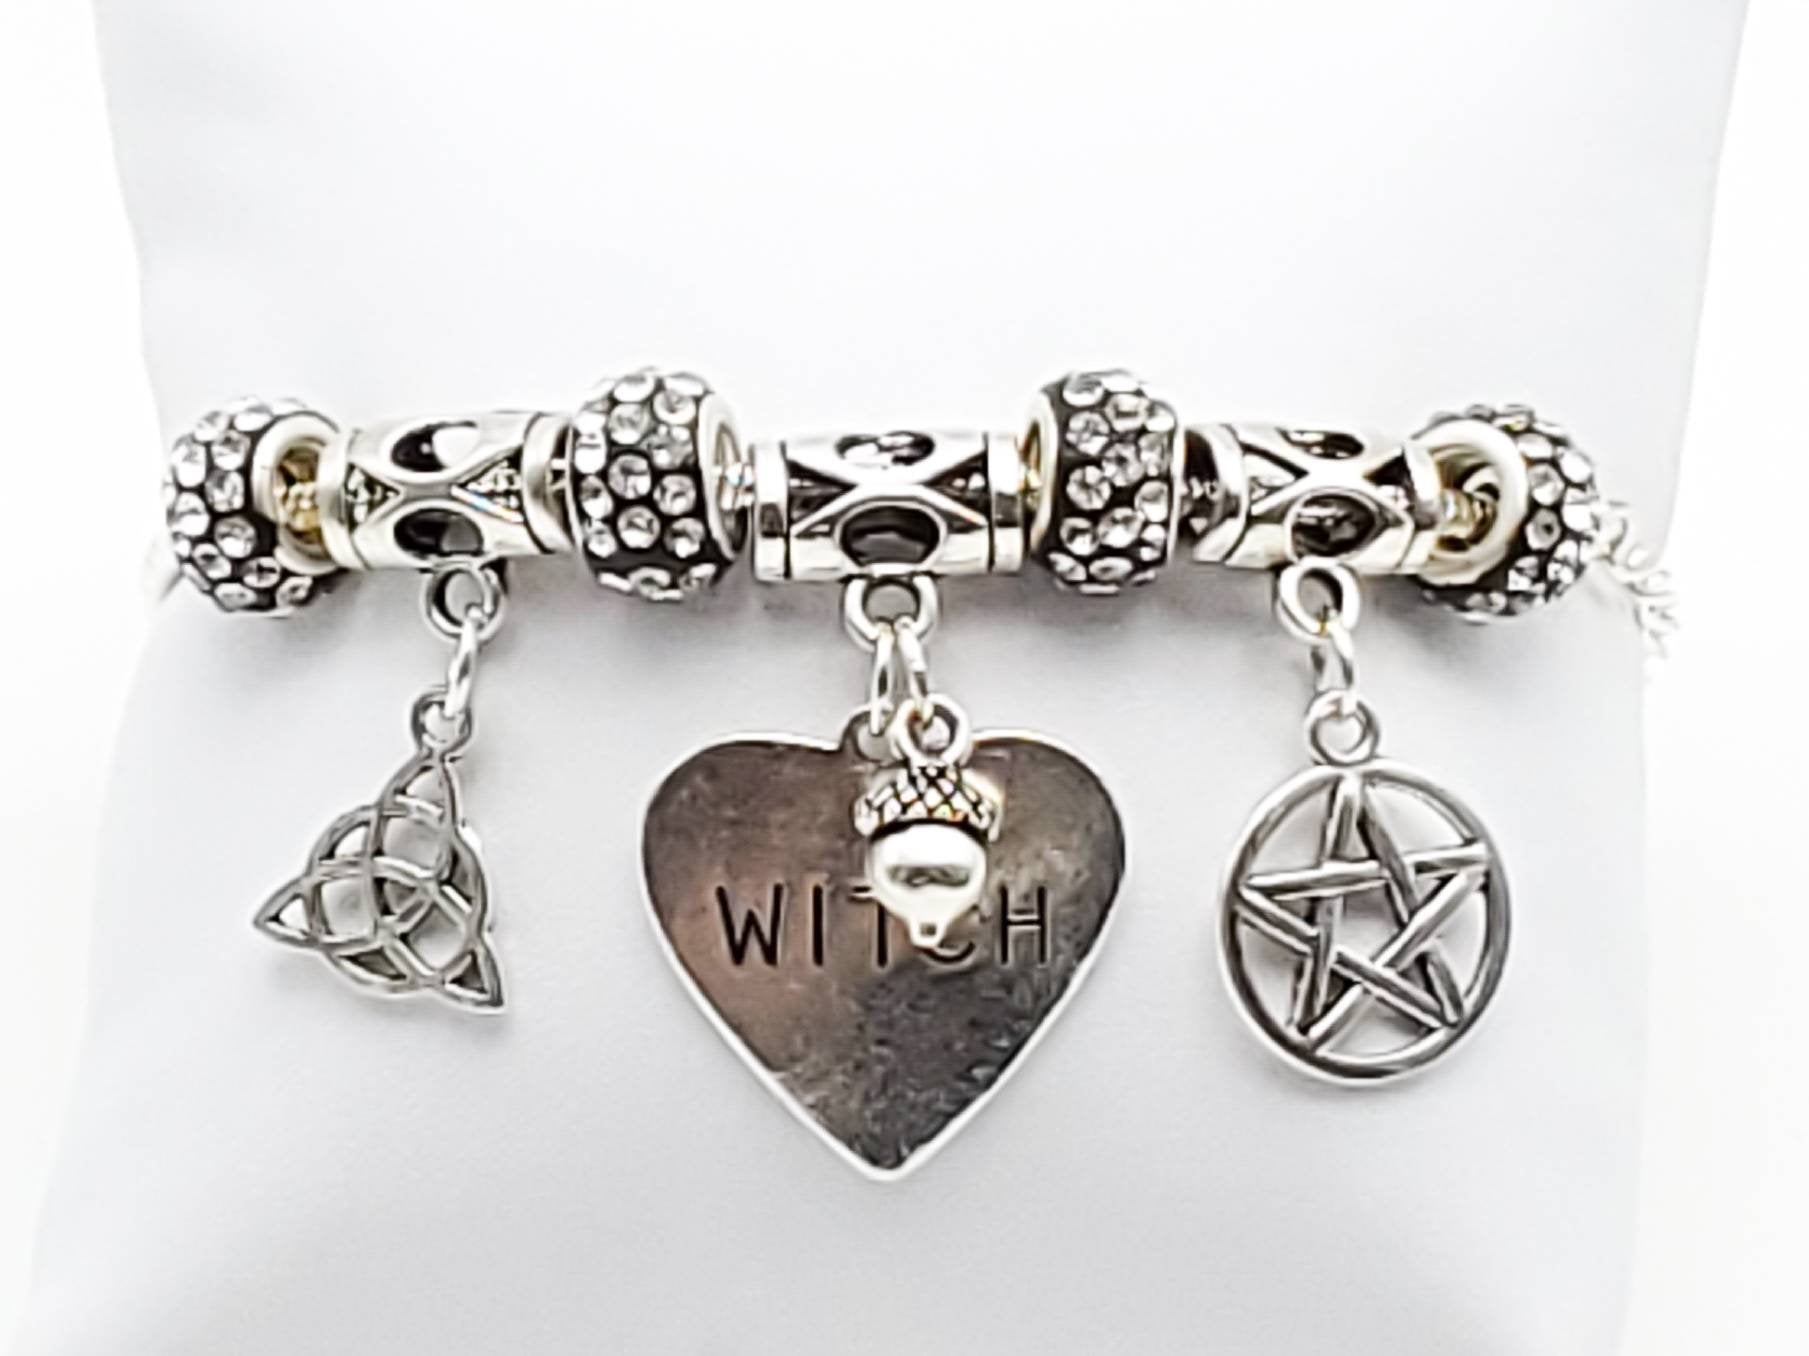 Charm Bracelet with Acorn, Triquera, Pentacle and WITCH Heart Charms - The Caffeinated Raven